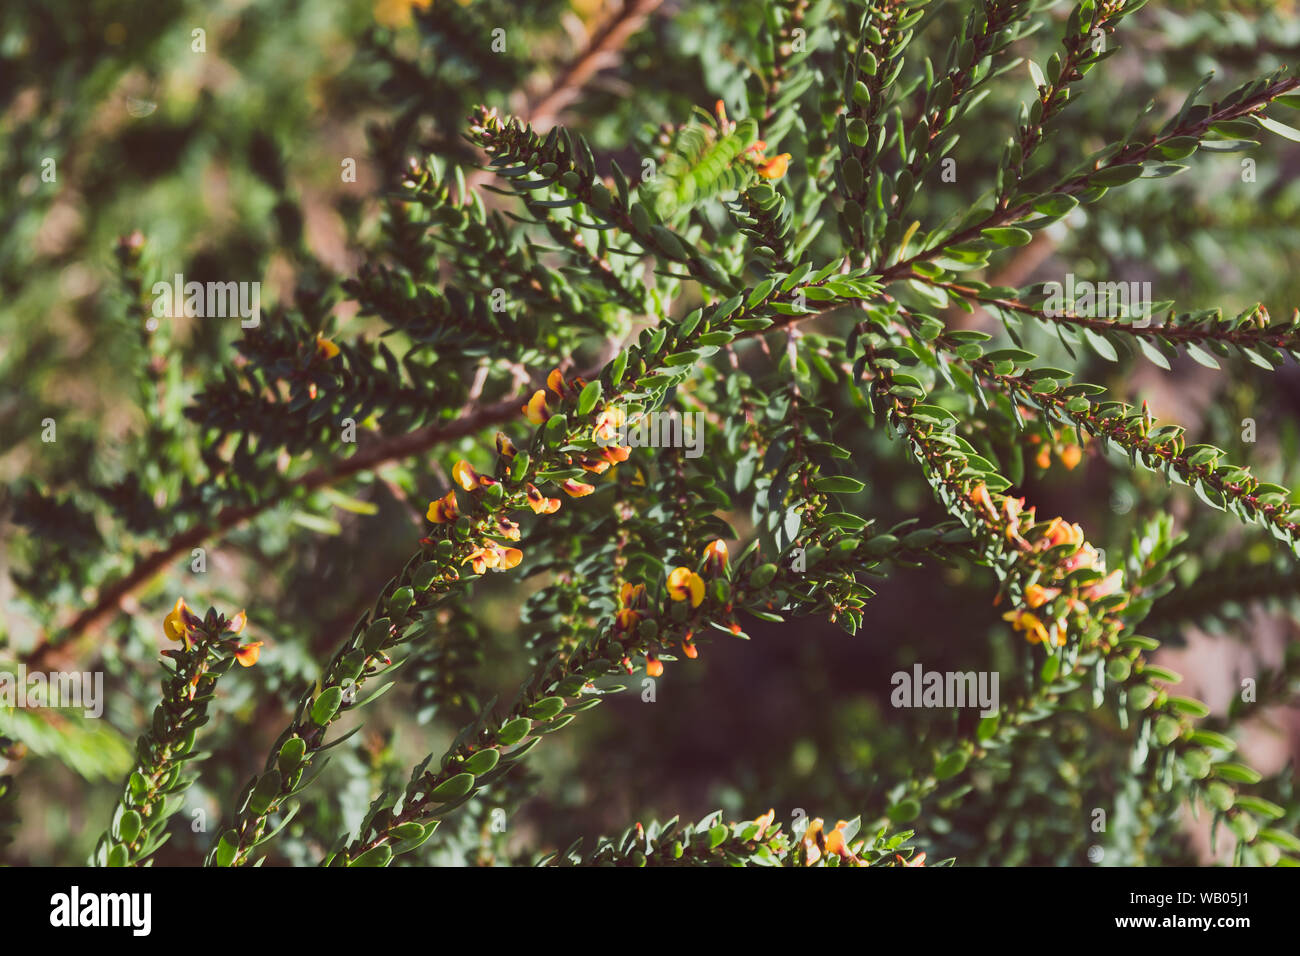 eutaxia obovata (also called egg and bacon plant) with green spiky leaves and yellow flowers, shot at shallow depth of field Stock Photo